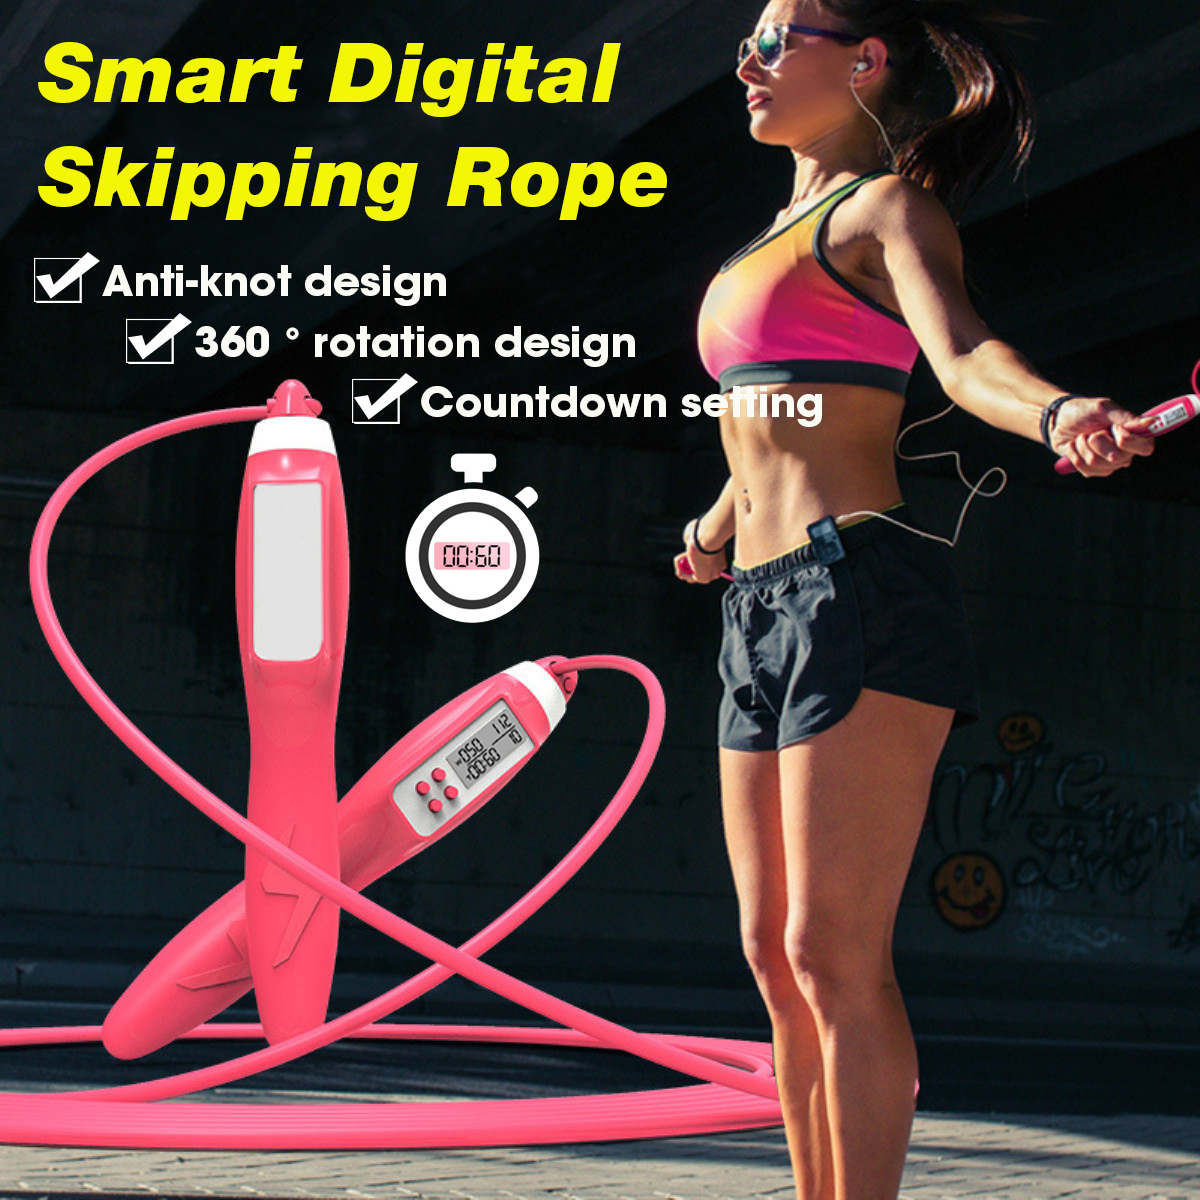 2-In-1-Smart-Digital-Rope-Jumping-Calorie-Counter-Home-Fitness-LCD-Display-Adjustable-Skipping-Rope-1678706-1